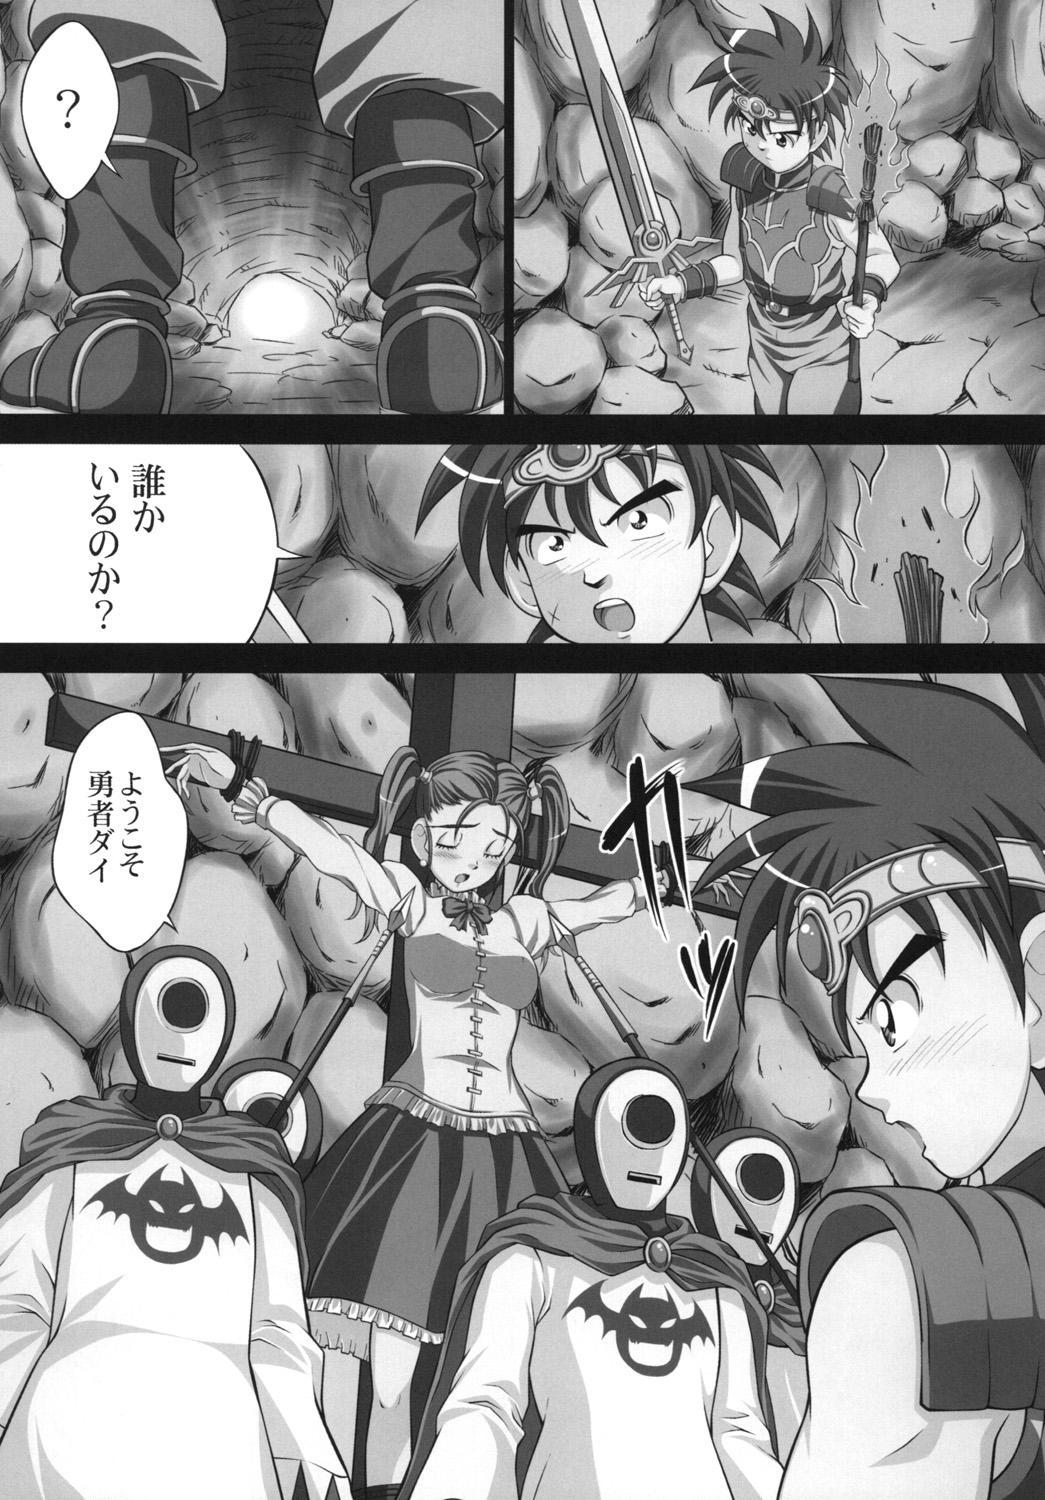 Anale Inma no Utage 1 - Dragon quest dai no daibouken Stepbrother - Page 3